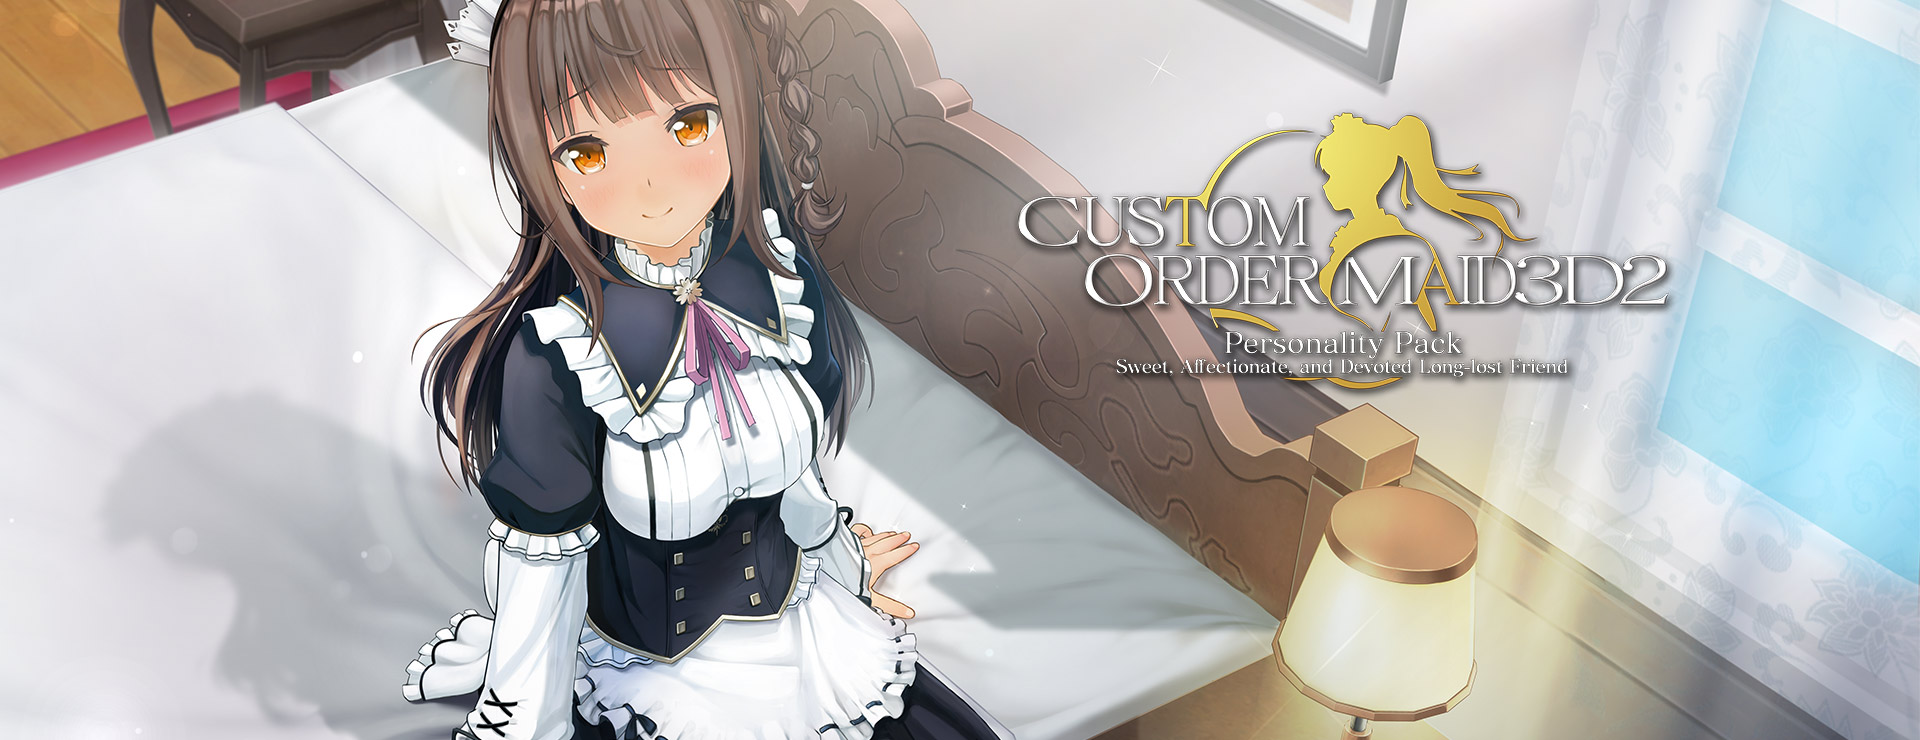 Custom Order Maid 3D 2 - Sweet, Affectionate, and Devoted Long-Lost Friend DLC - Simulation Jeu